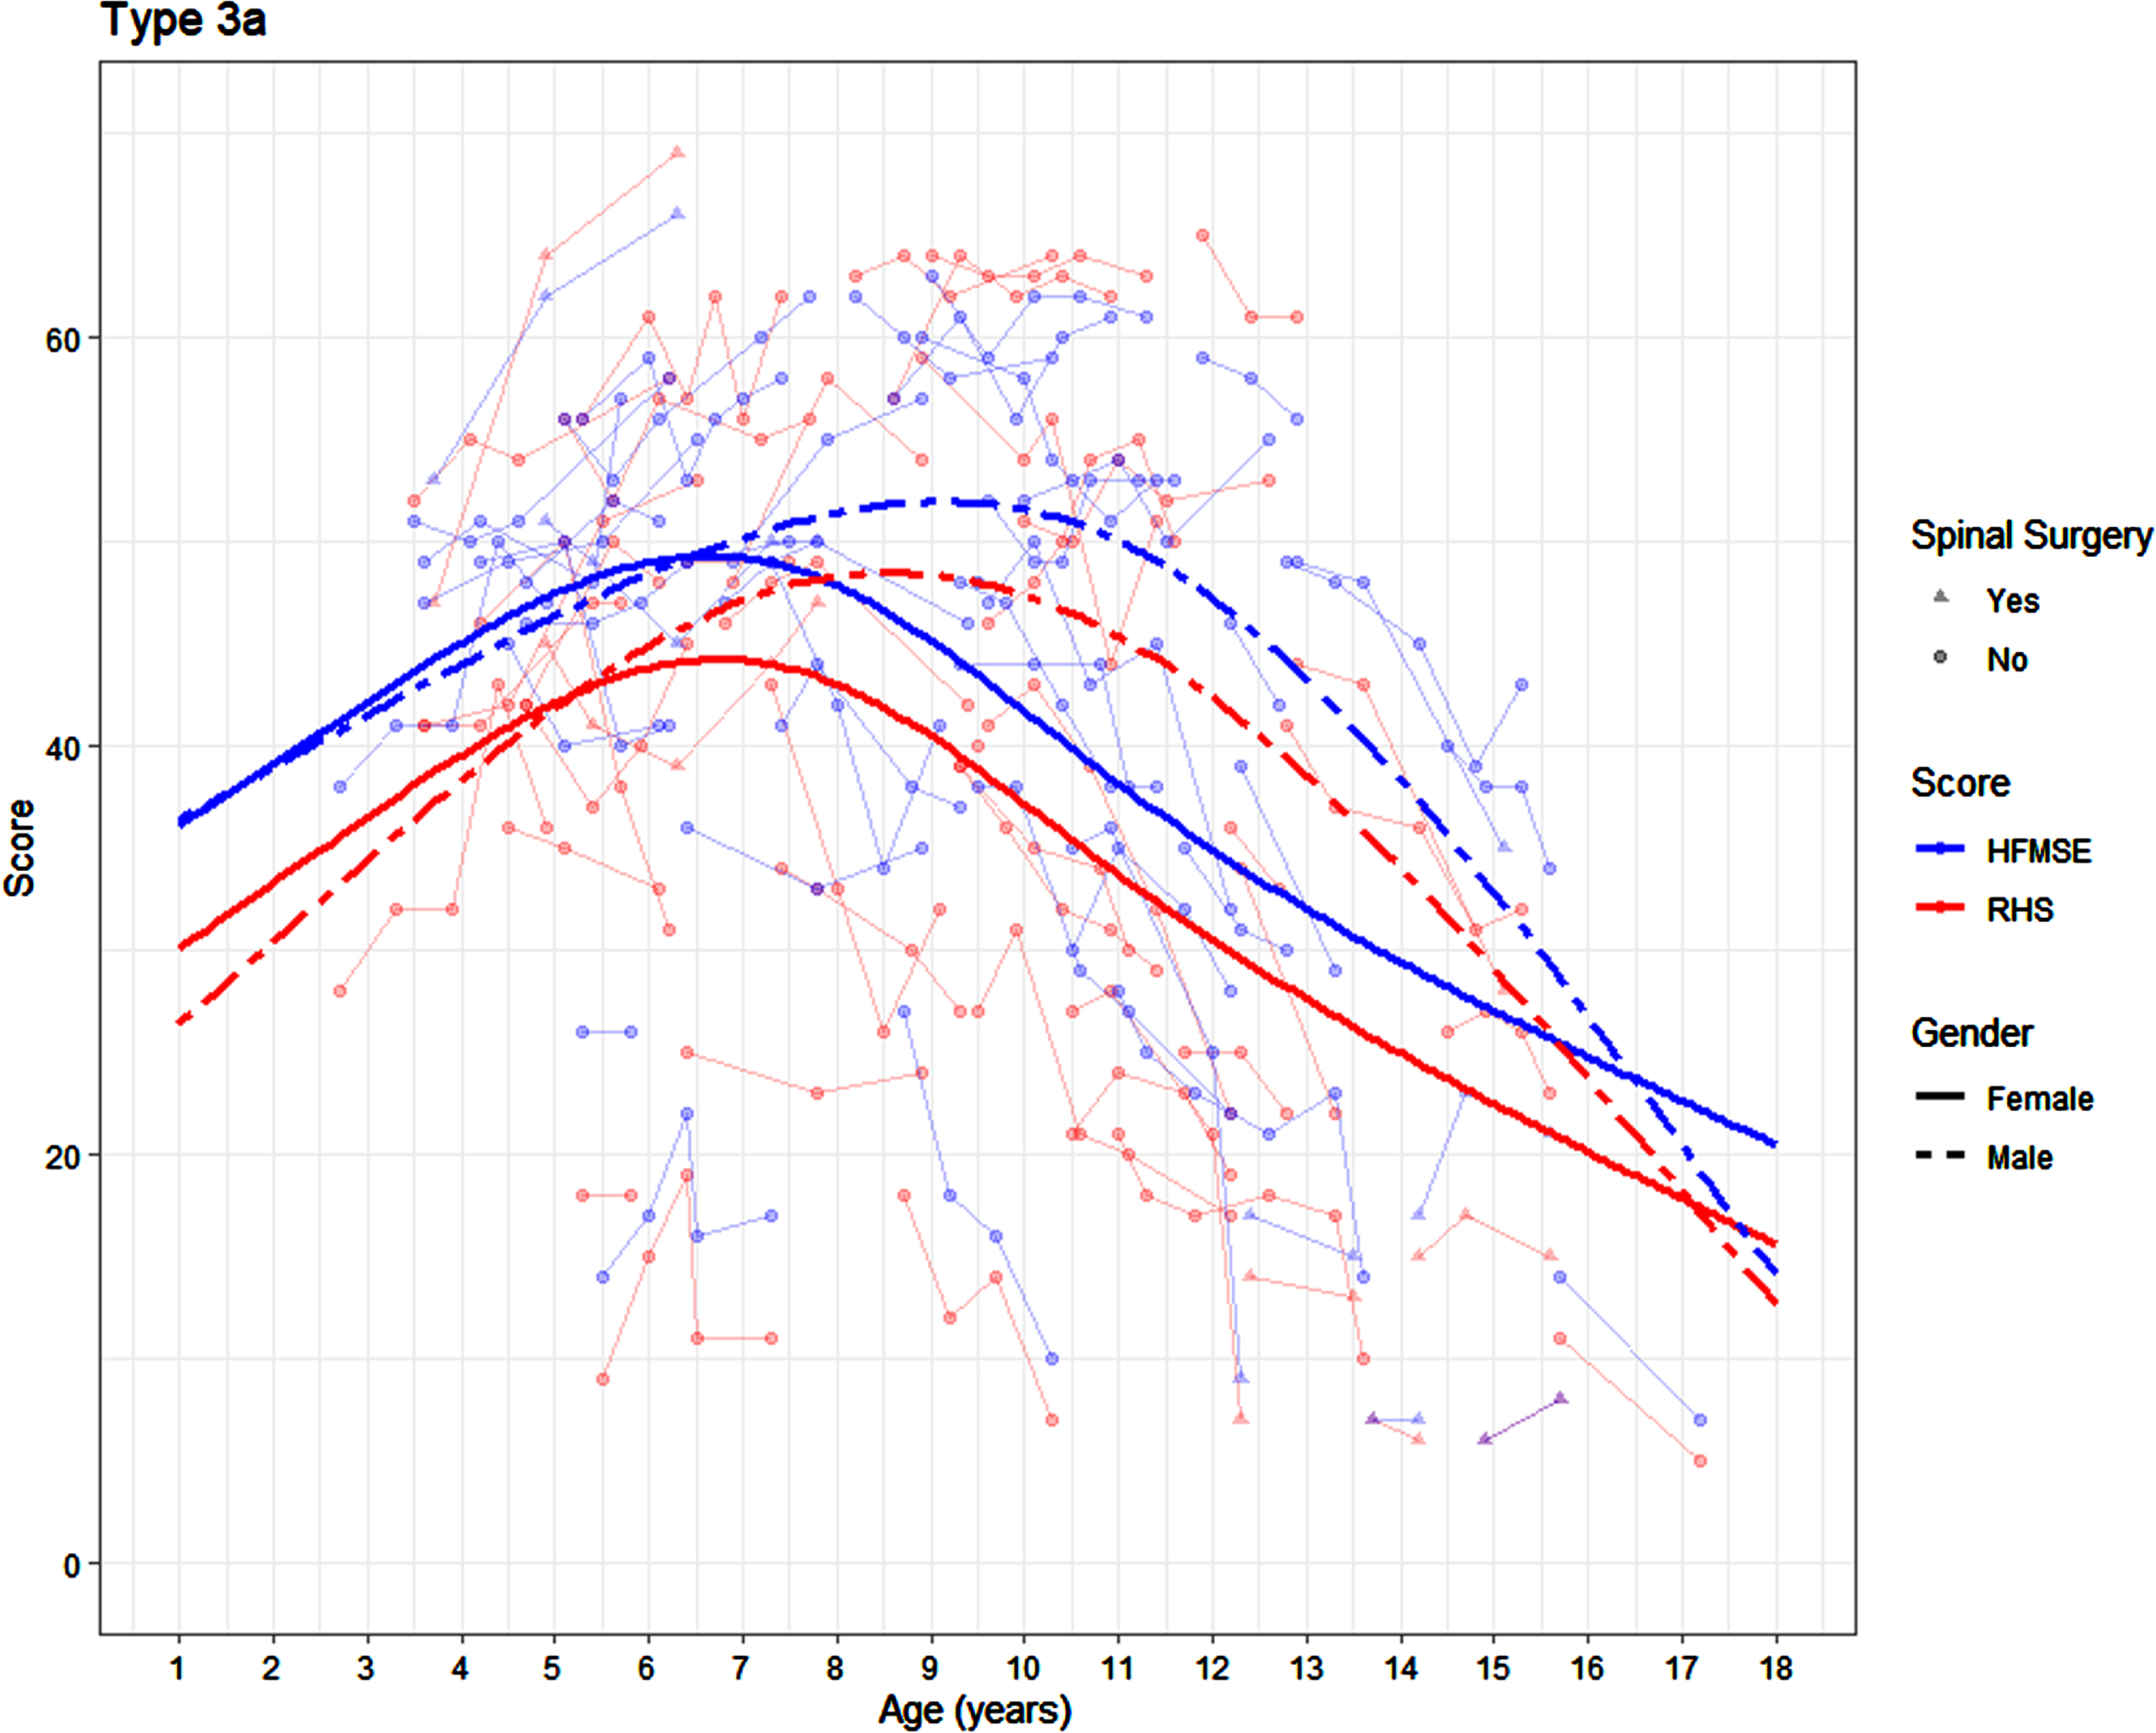 Average SMA 3a trajectory on the RHS and HFMSE by age and sex (average is presented for participants who have not undergone scoliosis surgery).